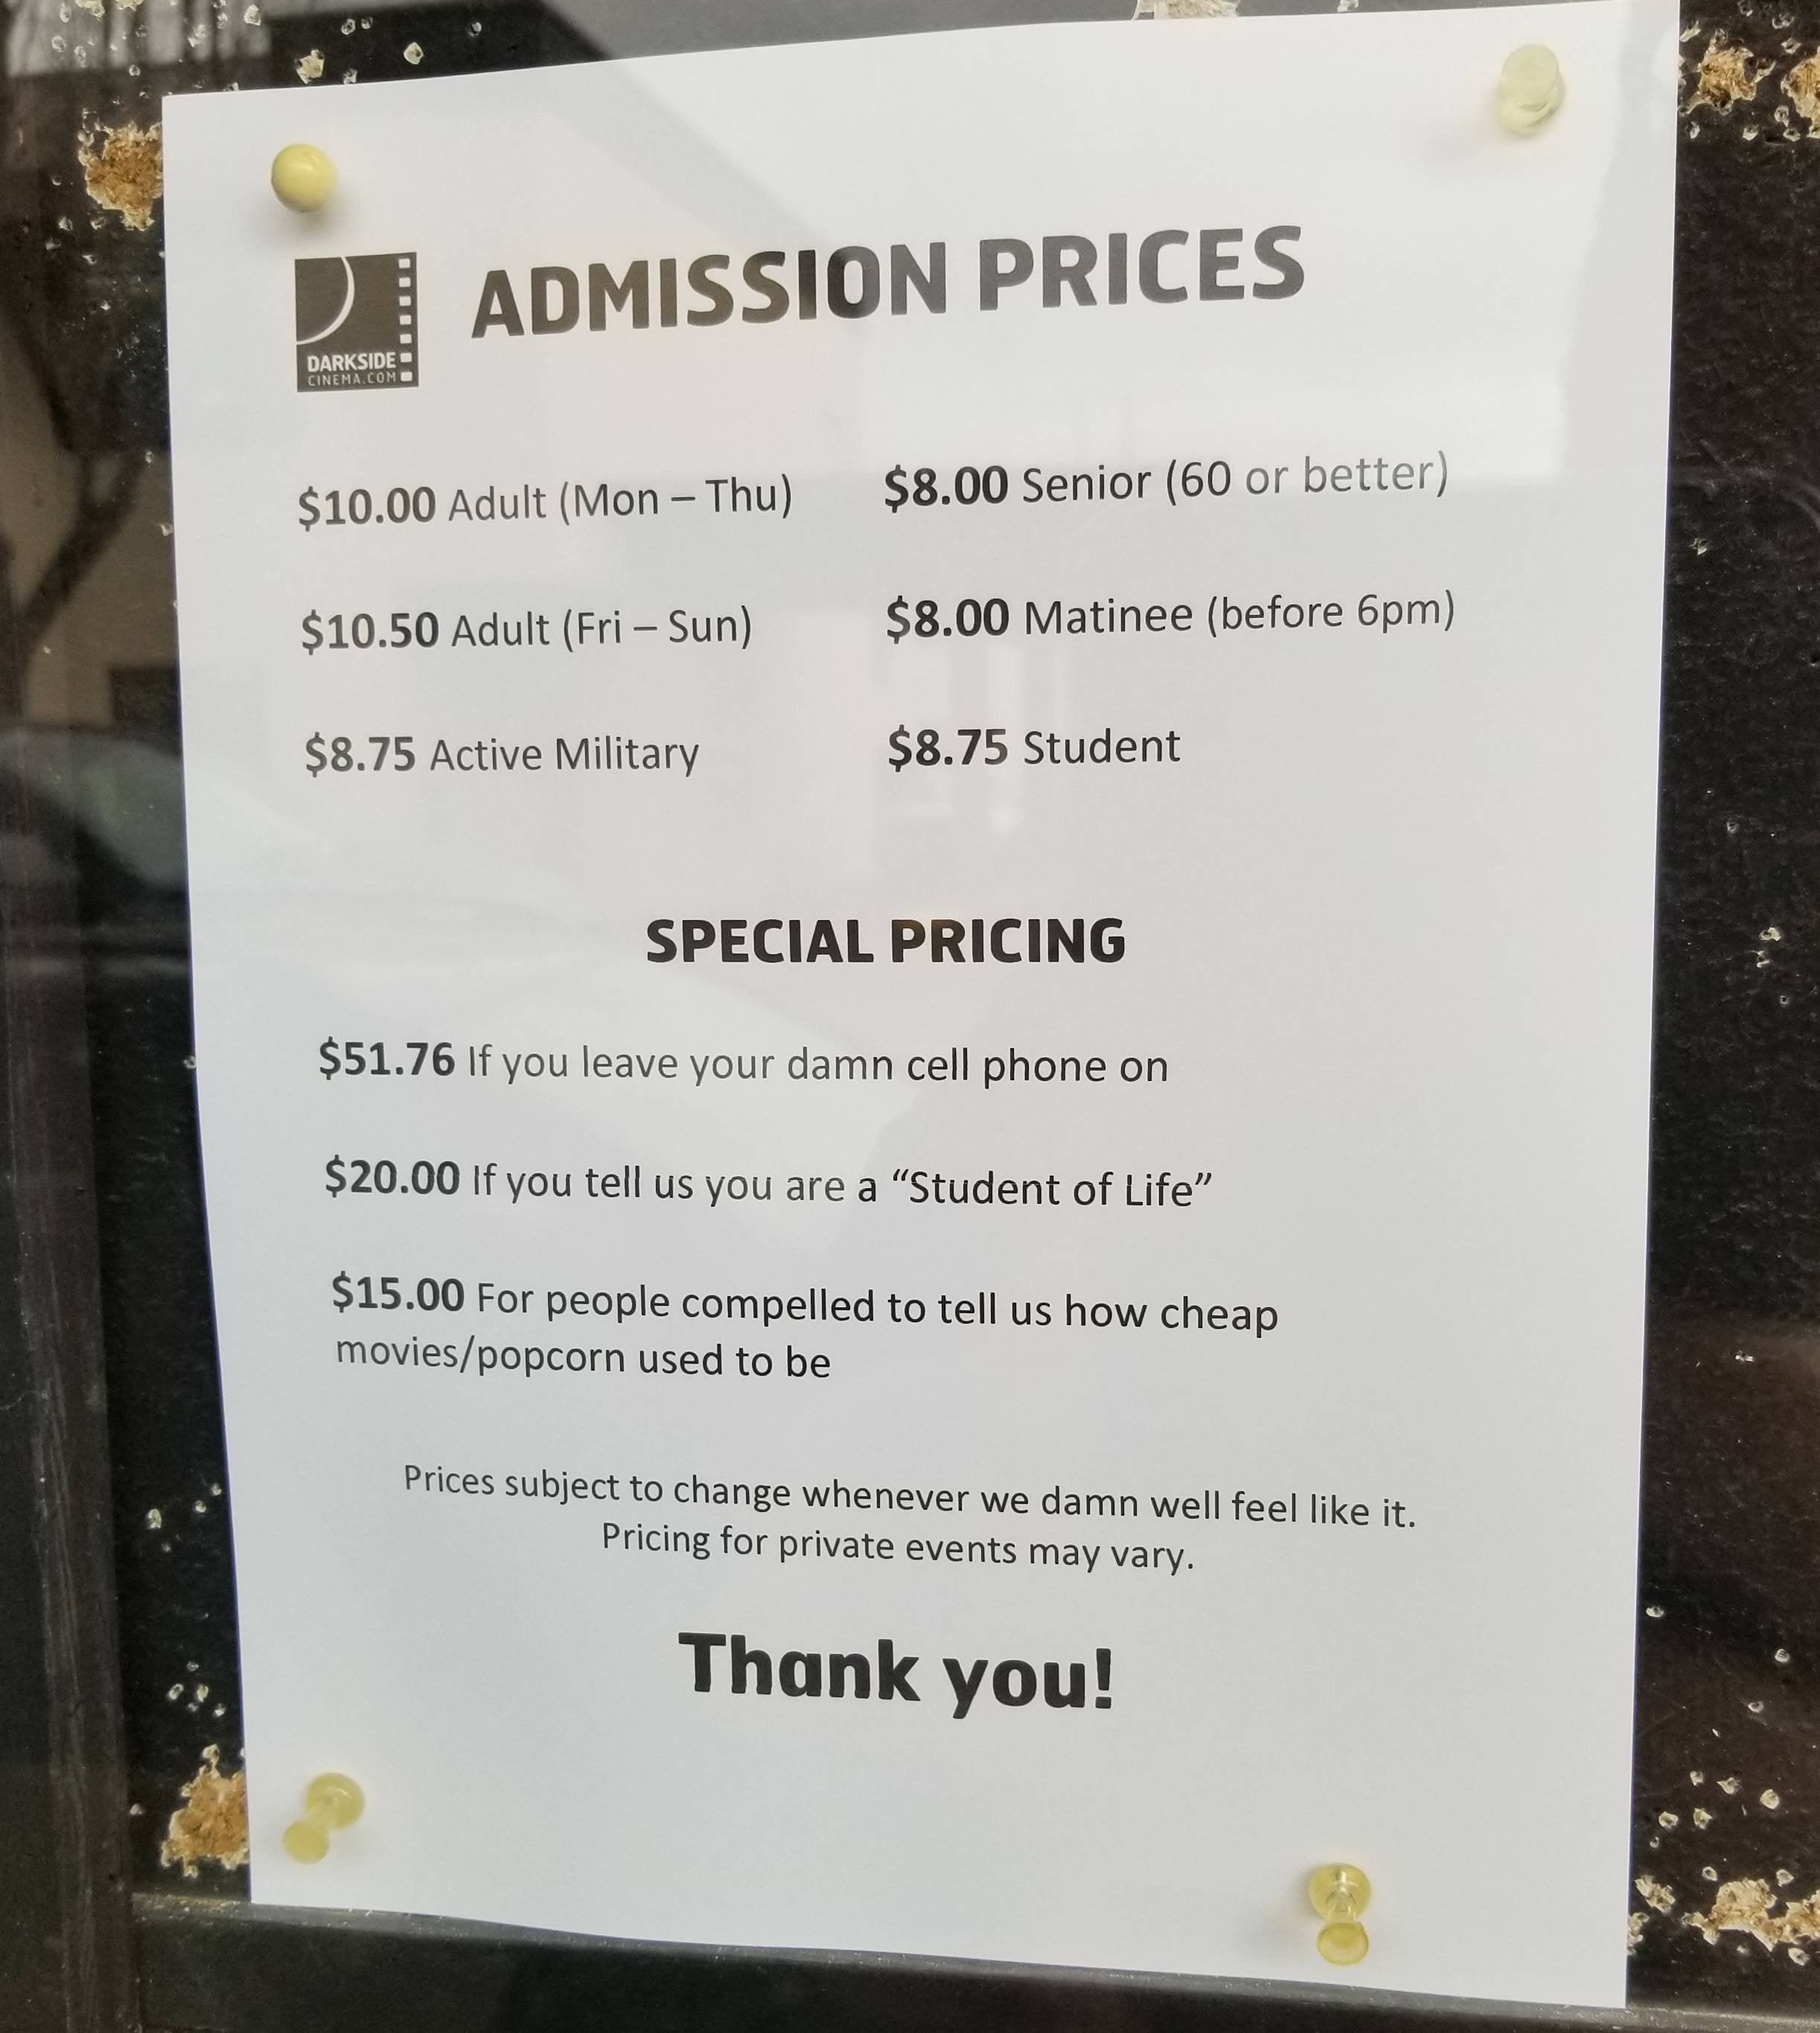 super entitled people - commemorative plaque - Pi Admission Prices $10.00 Adult Mon Thu $8.00 Senior 60 or better $10.50 Adult Fri Sun $8.00 Matinee before 6pm $8.75 Active Military $8.75 Student Special Pricing $51.76 If you leave your damn cell phone on